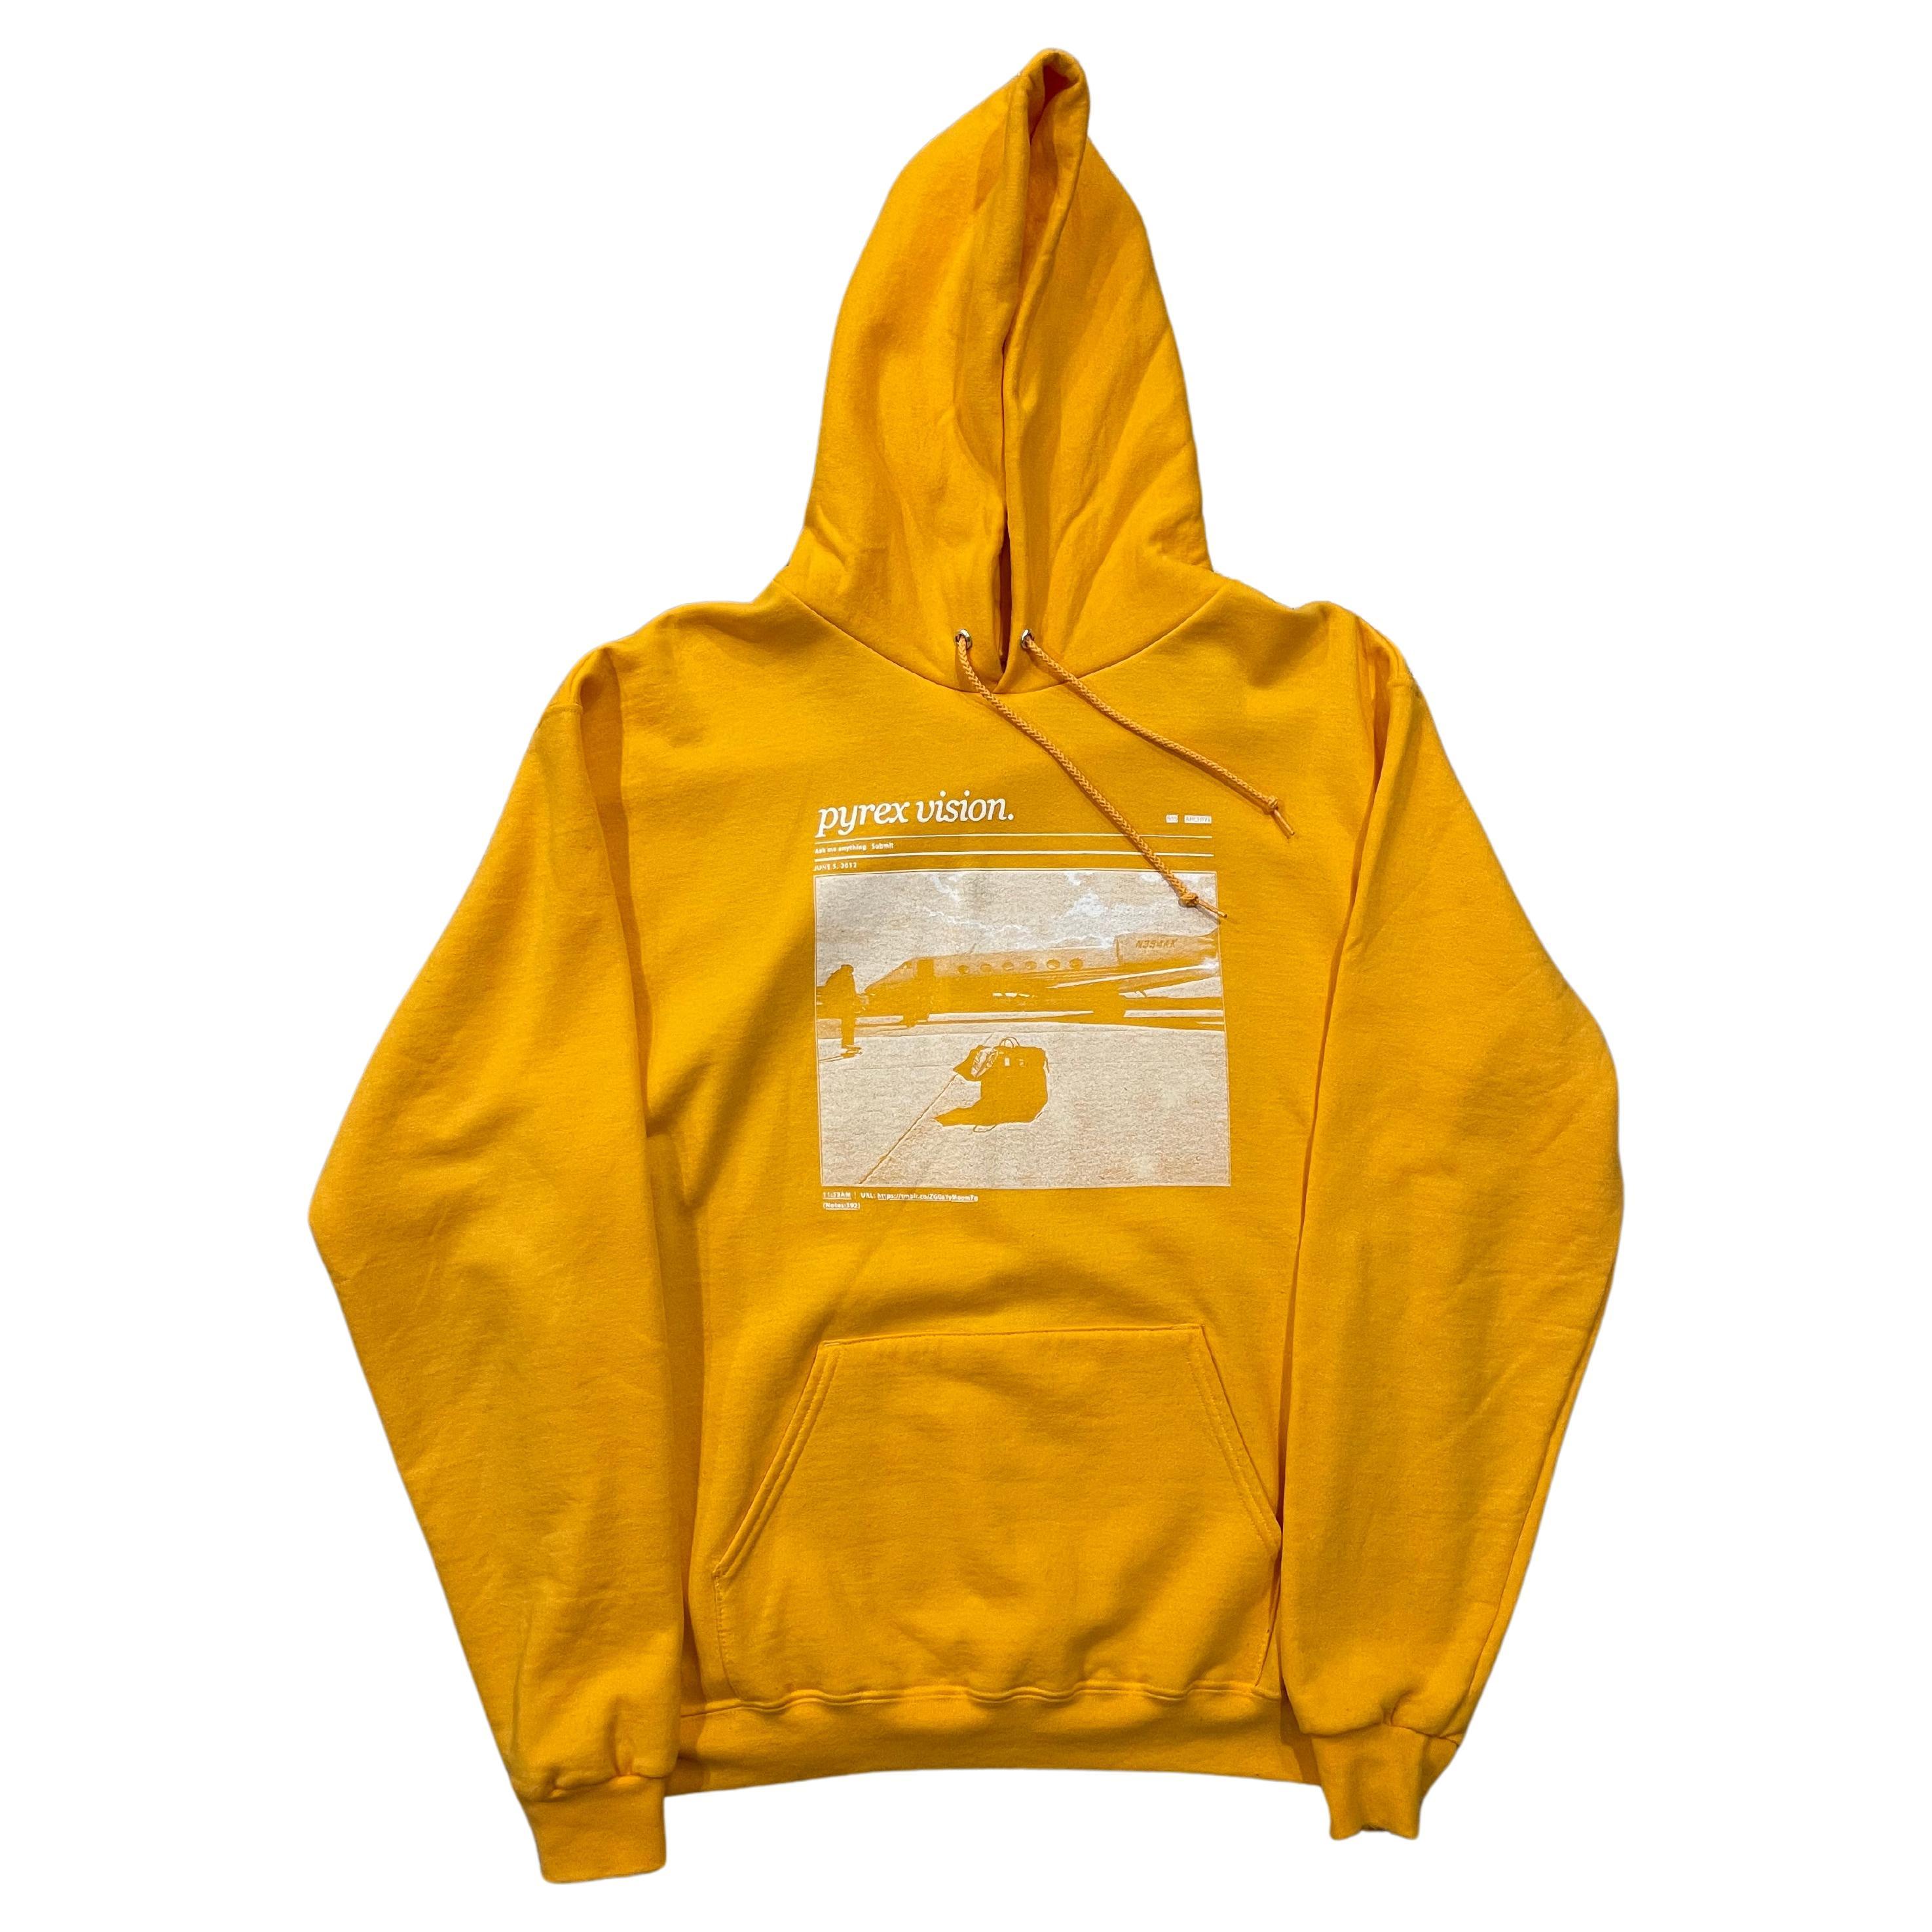 Virgil x MCA Figures of Speech Pyrex Vision Yellow Hoodie For Sale